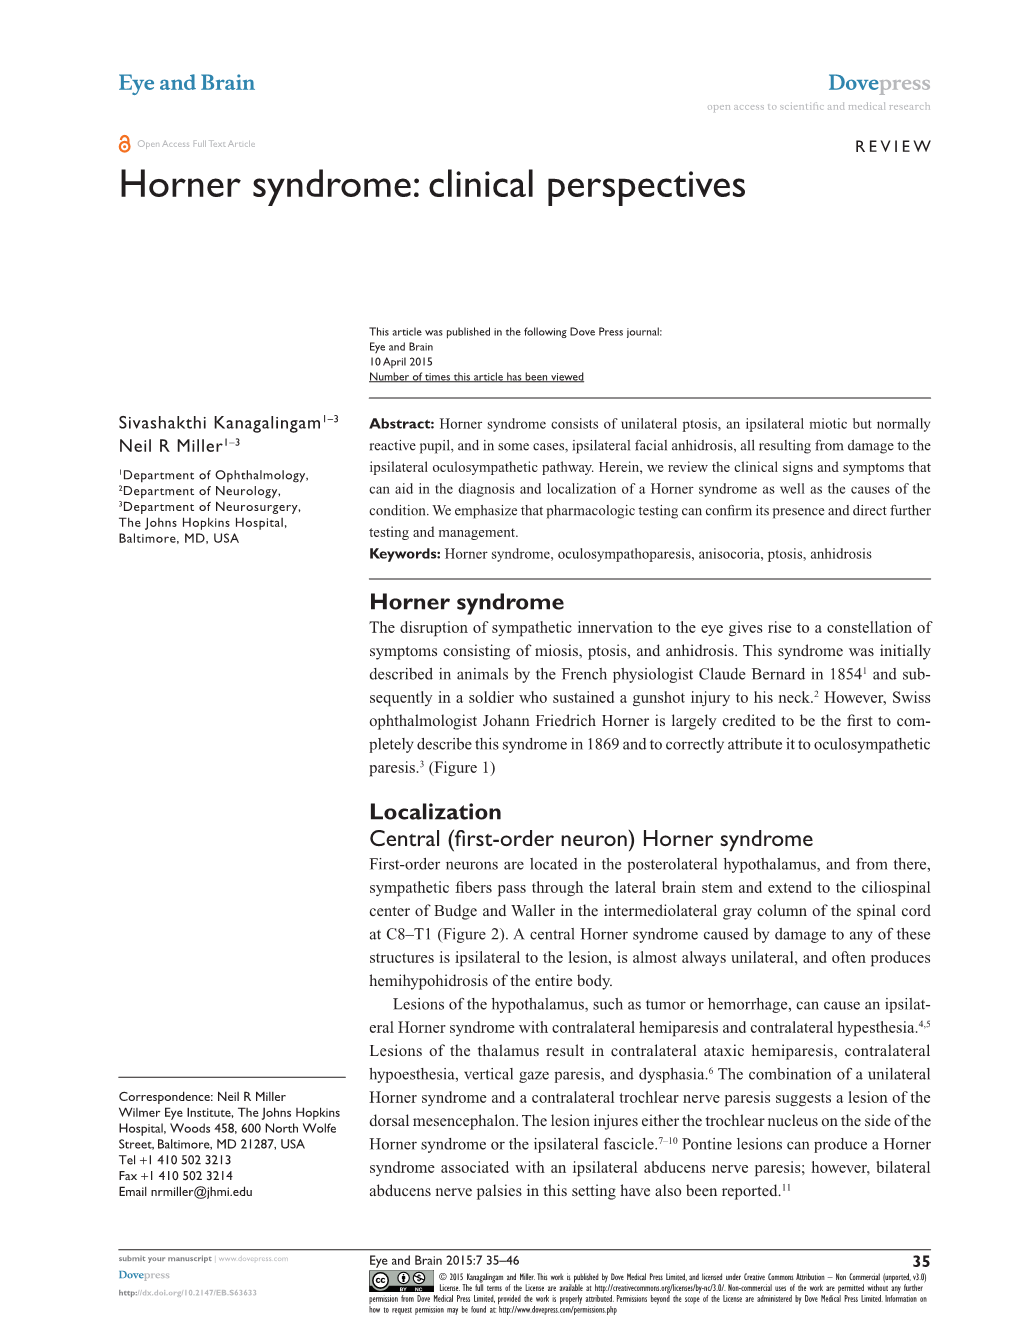 Horner Syndrome: Clinical Perspectives